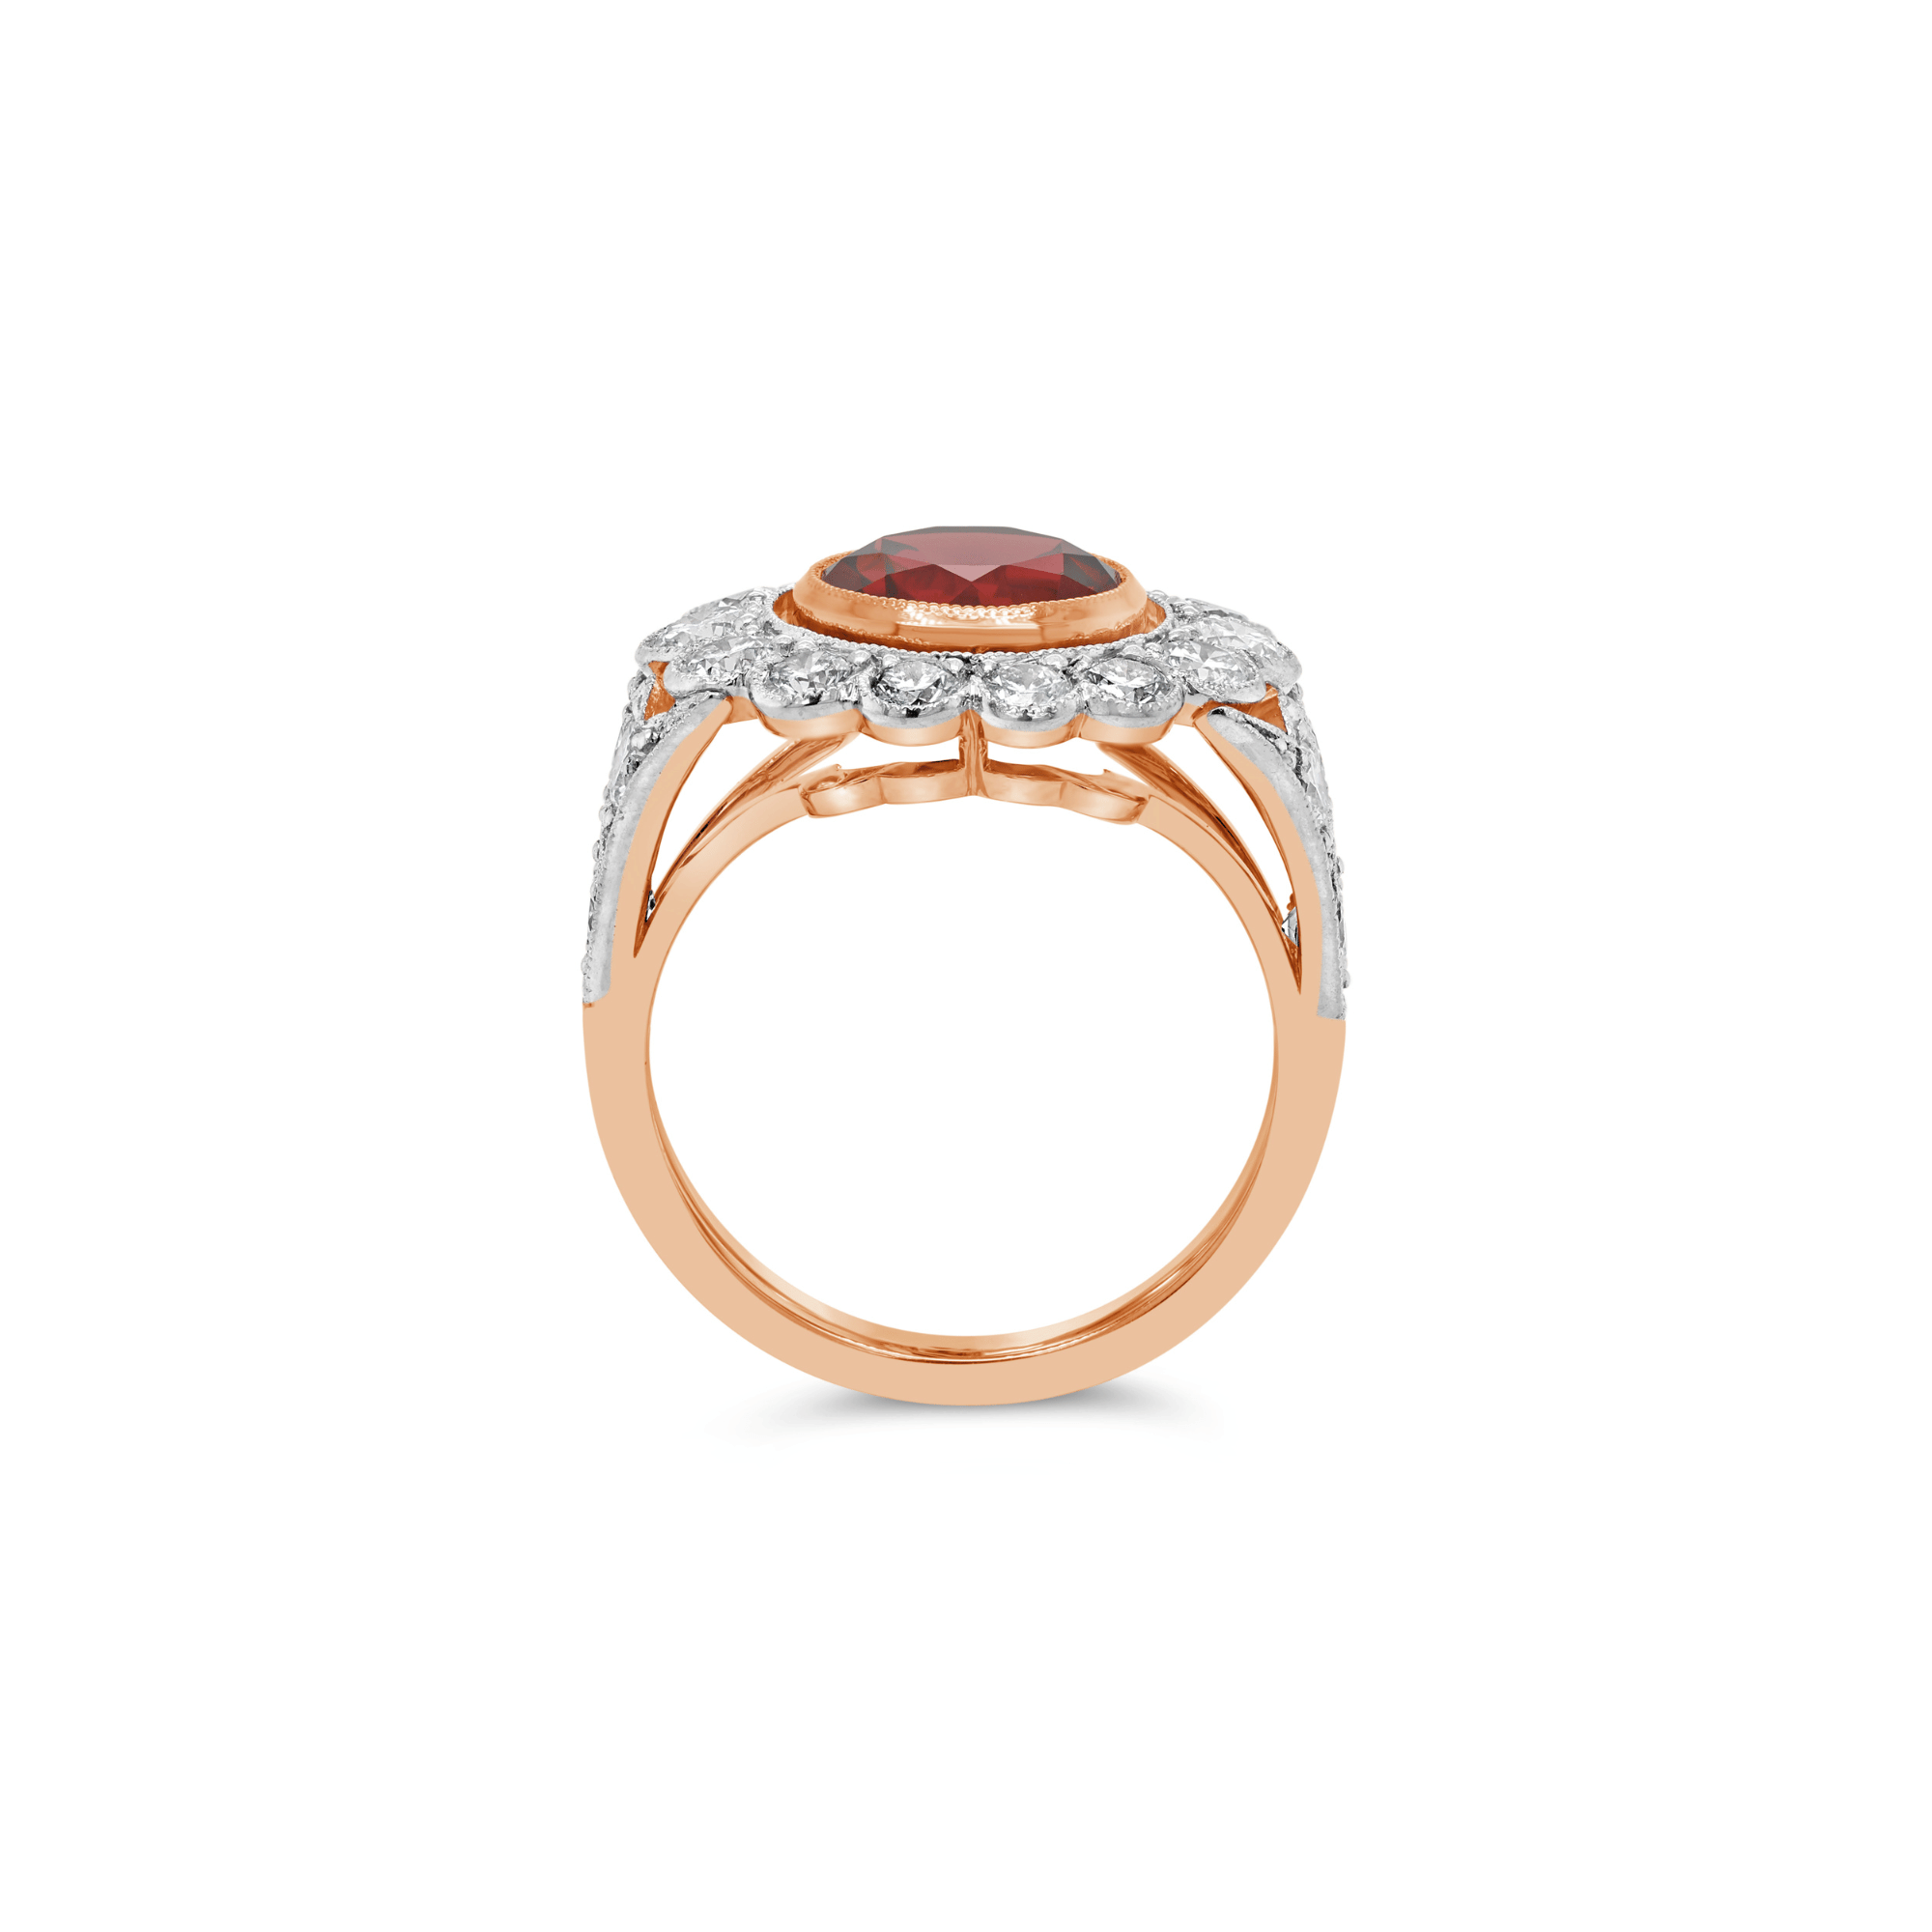 Red Garnet and Diamond Ring in white and rose gold